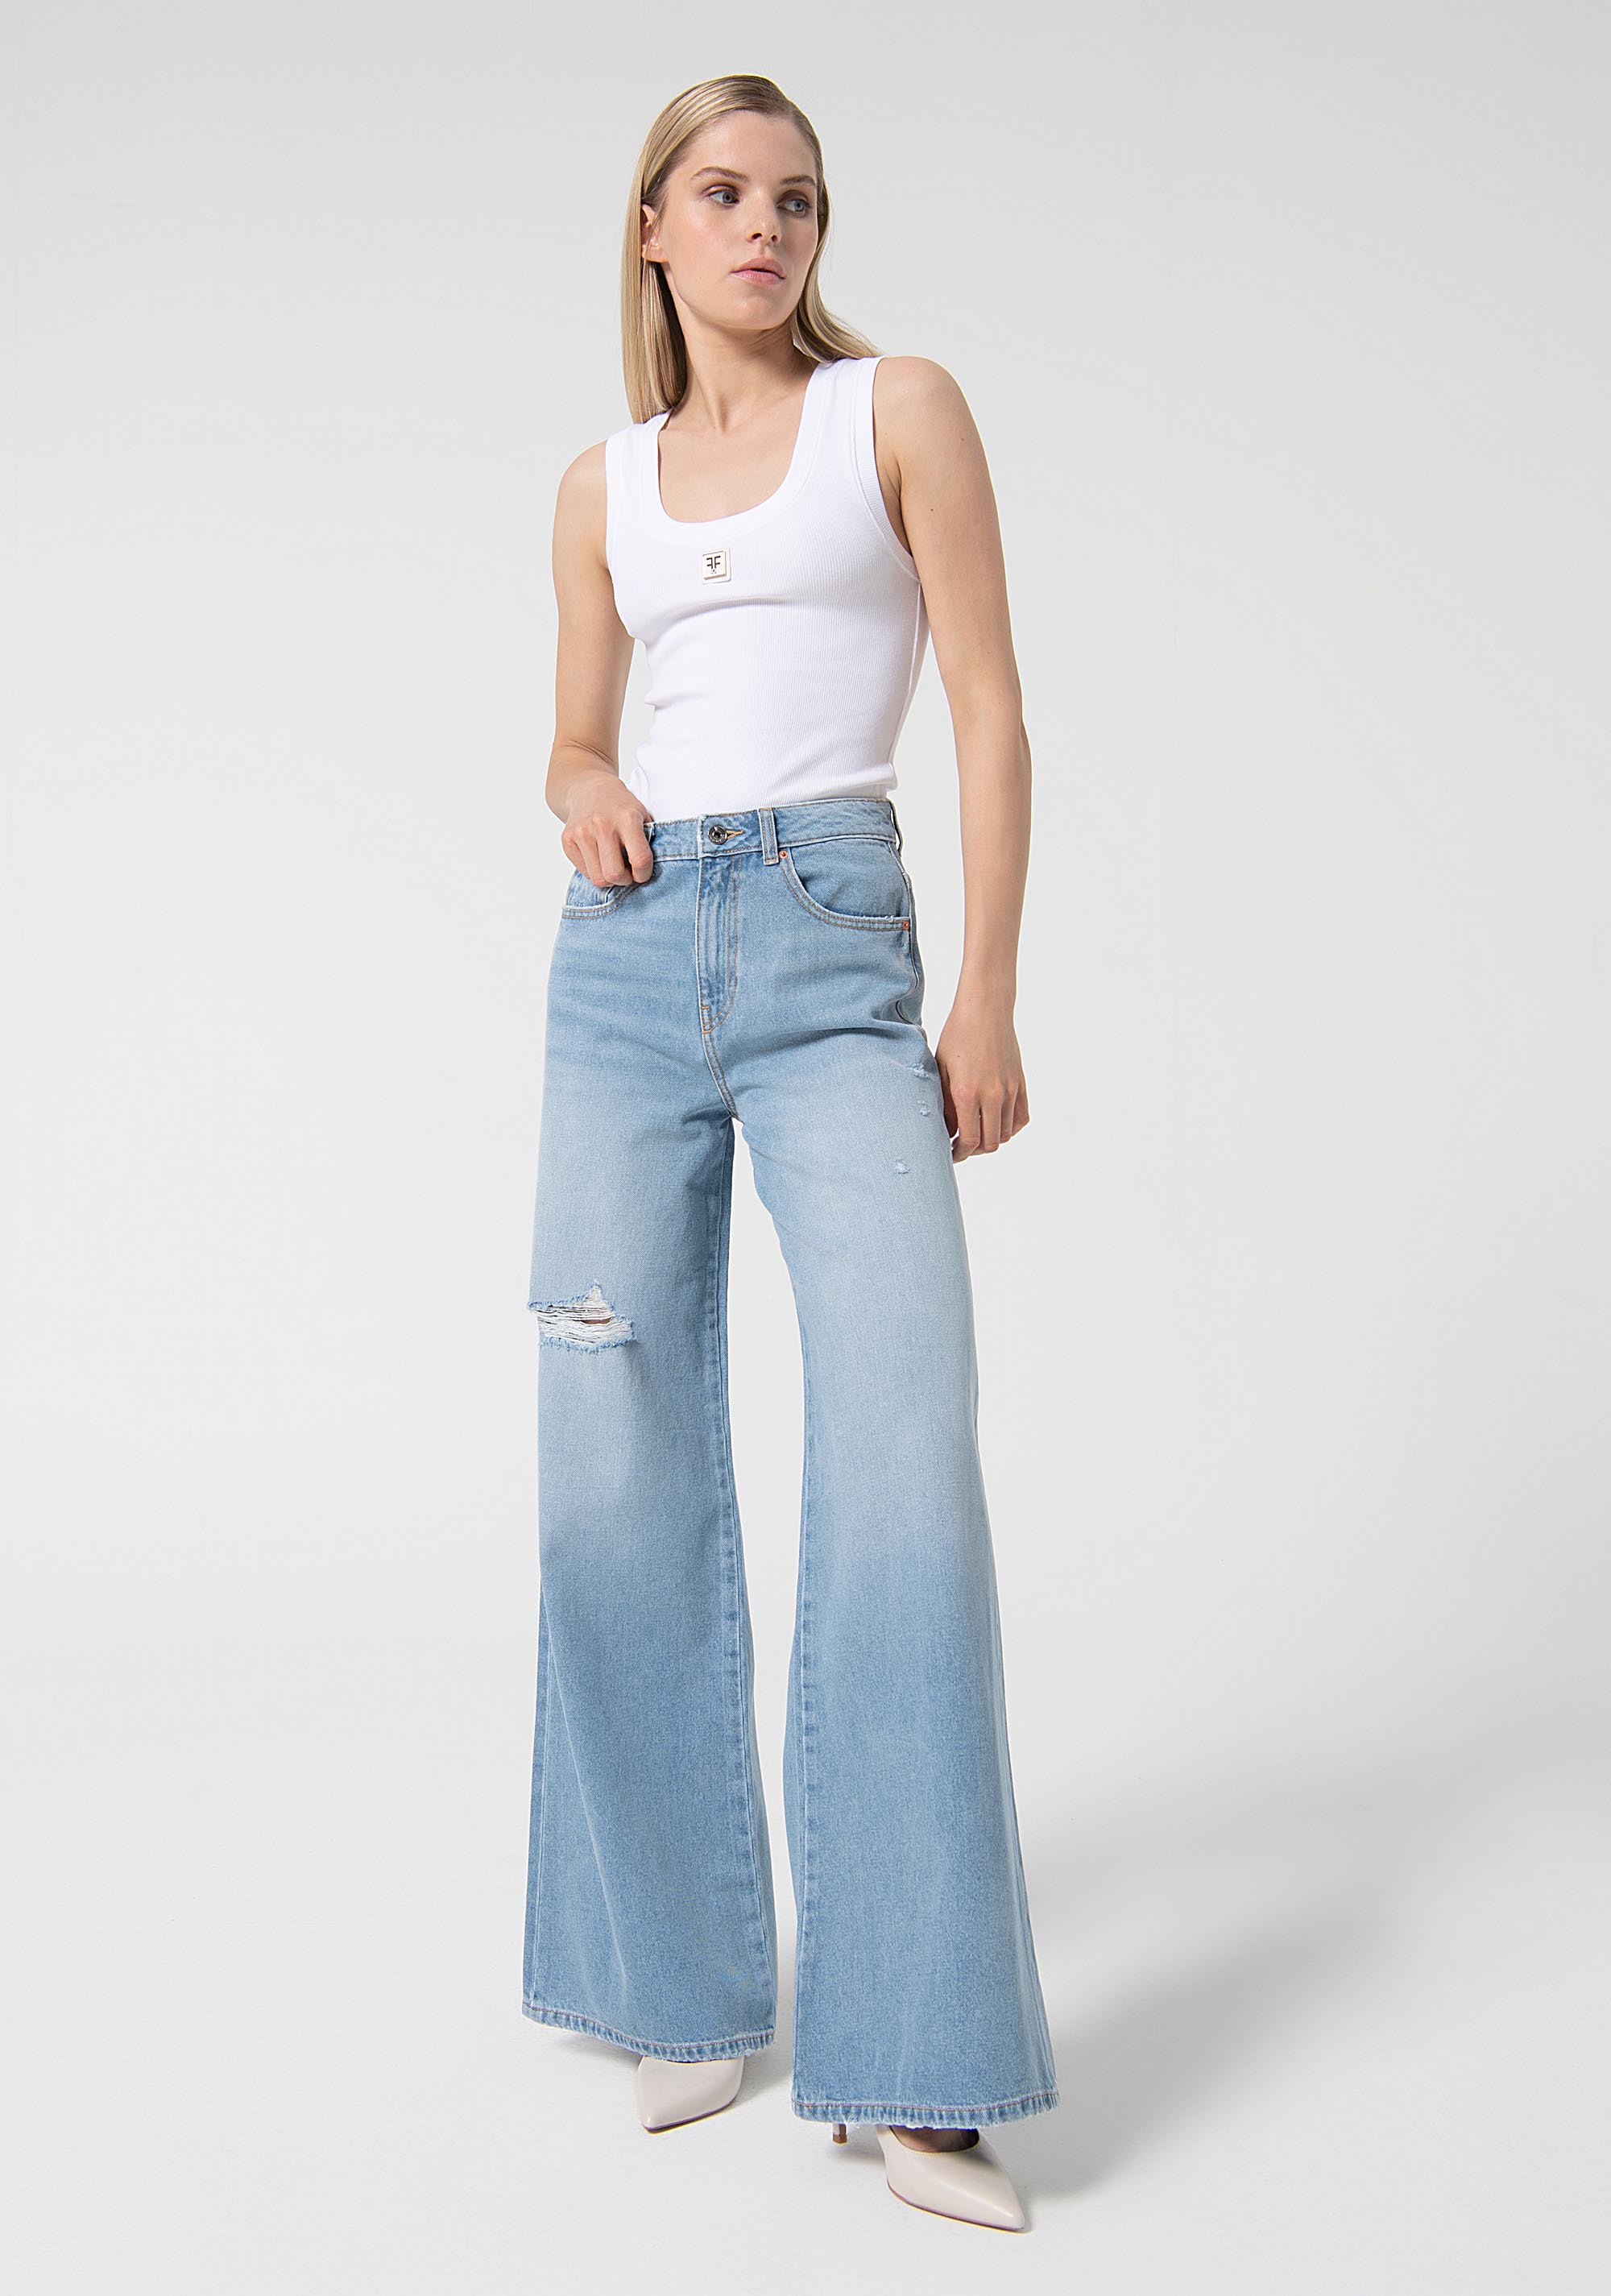 Jeans wide leg made in denim with bleached light wash FP24SV3015D41903 ...